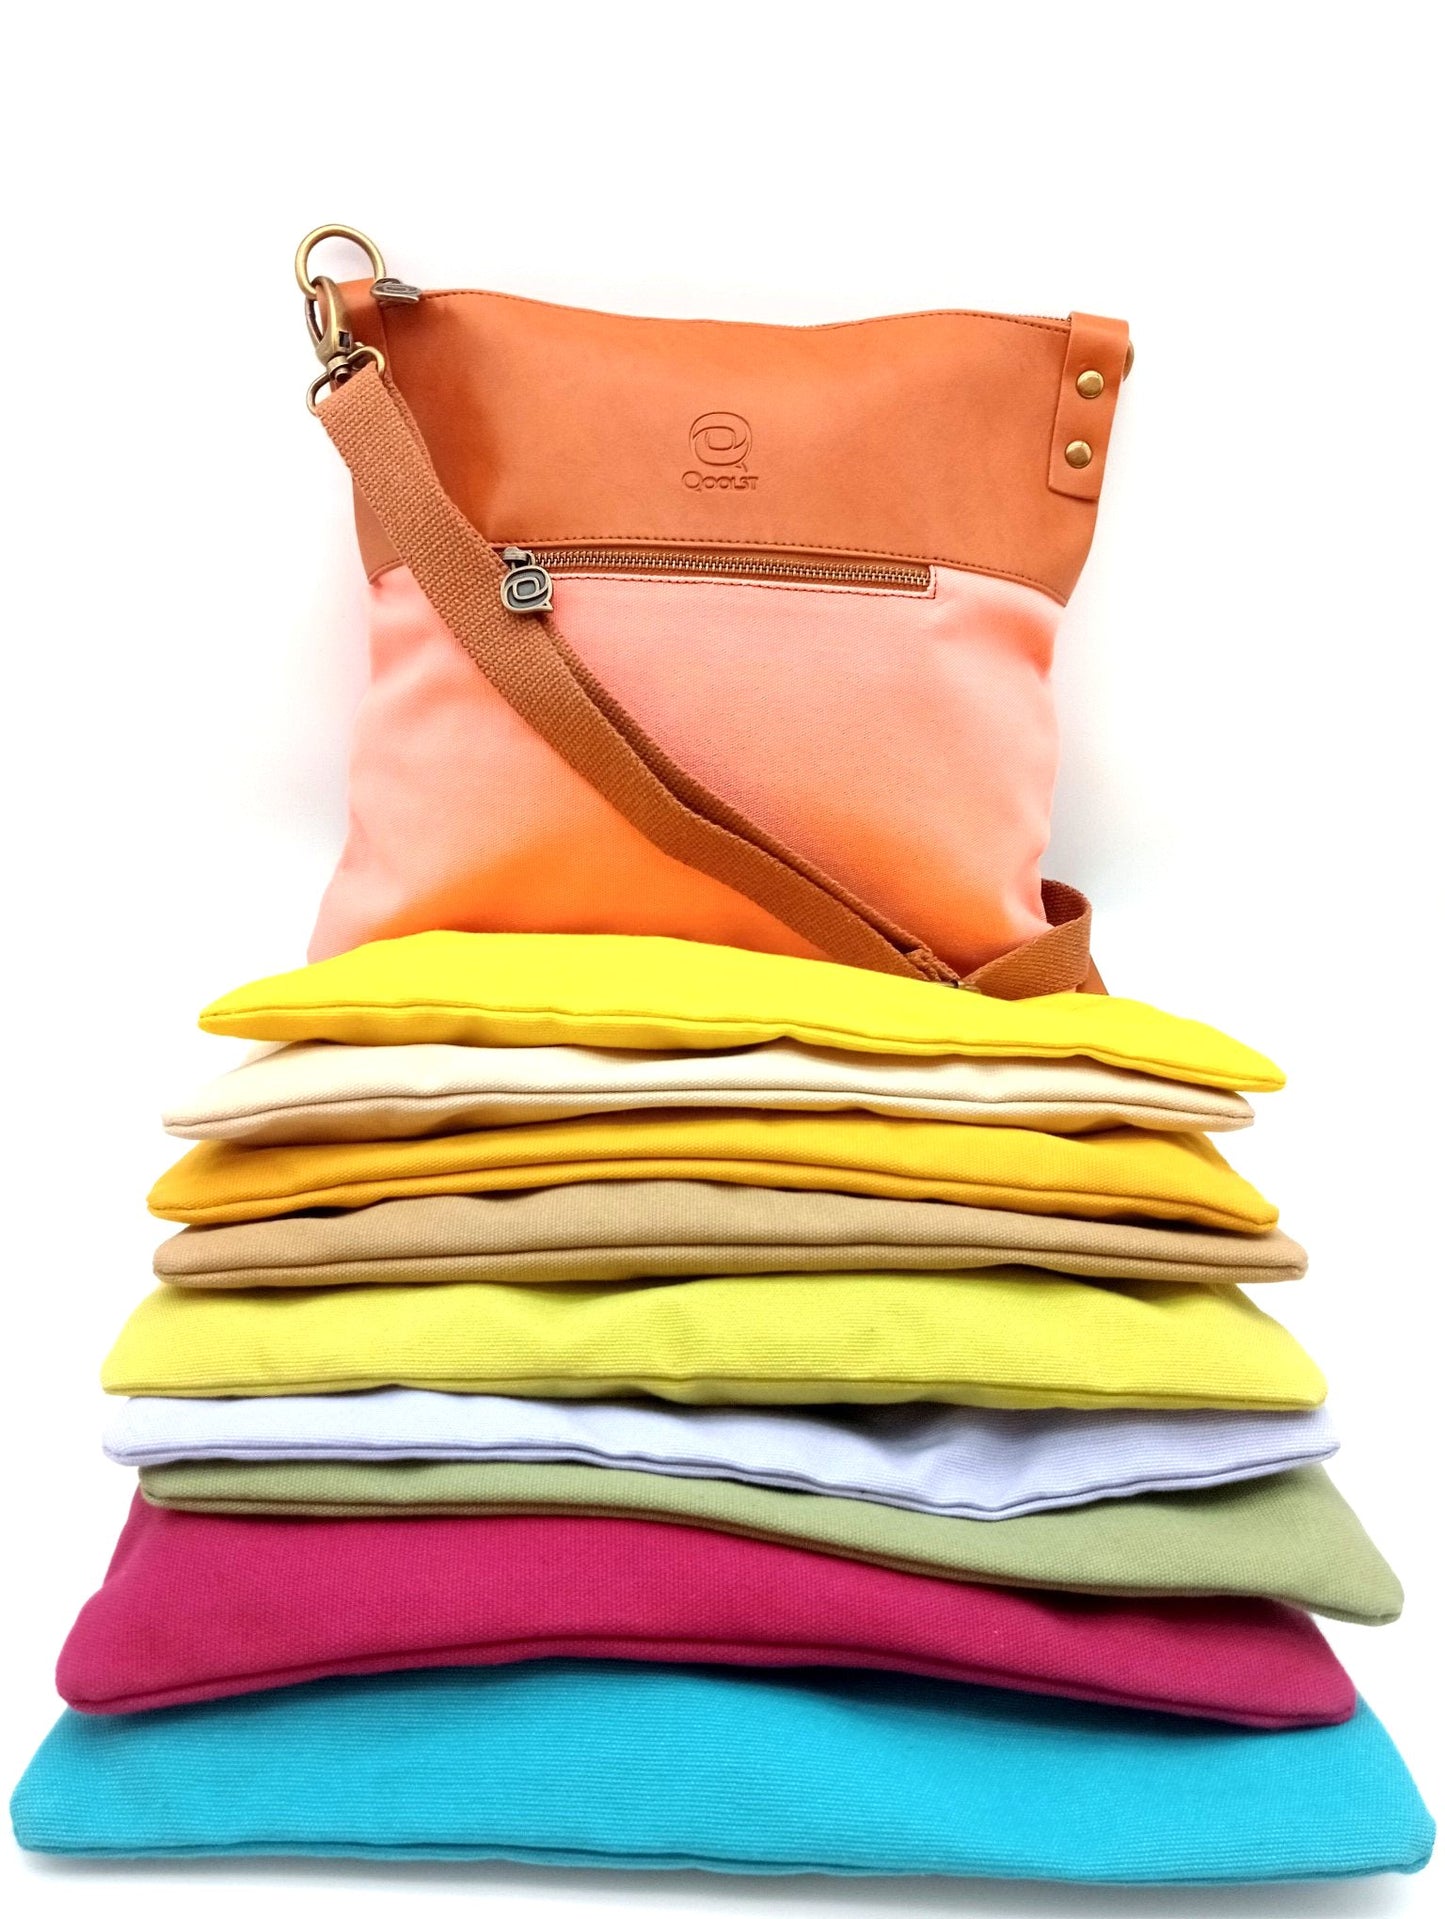 Candy Qoolst cotton and regenerated leather shoulder bag for women and men